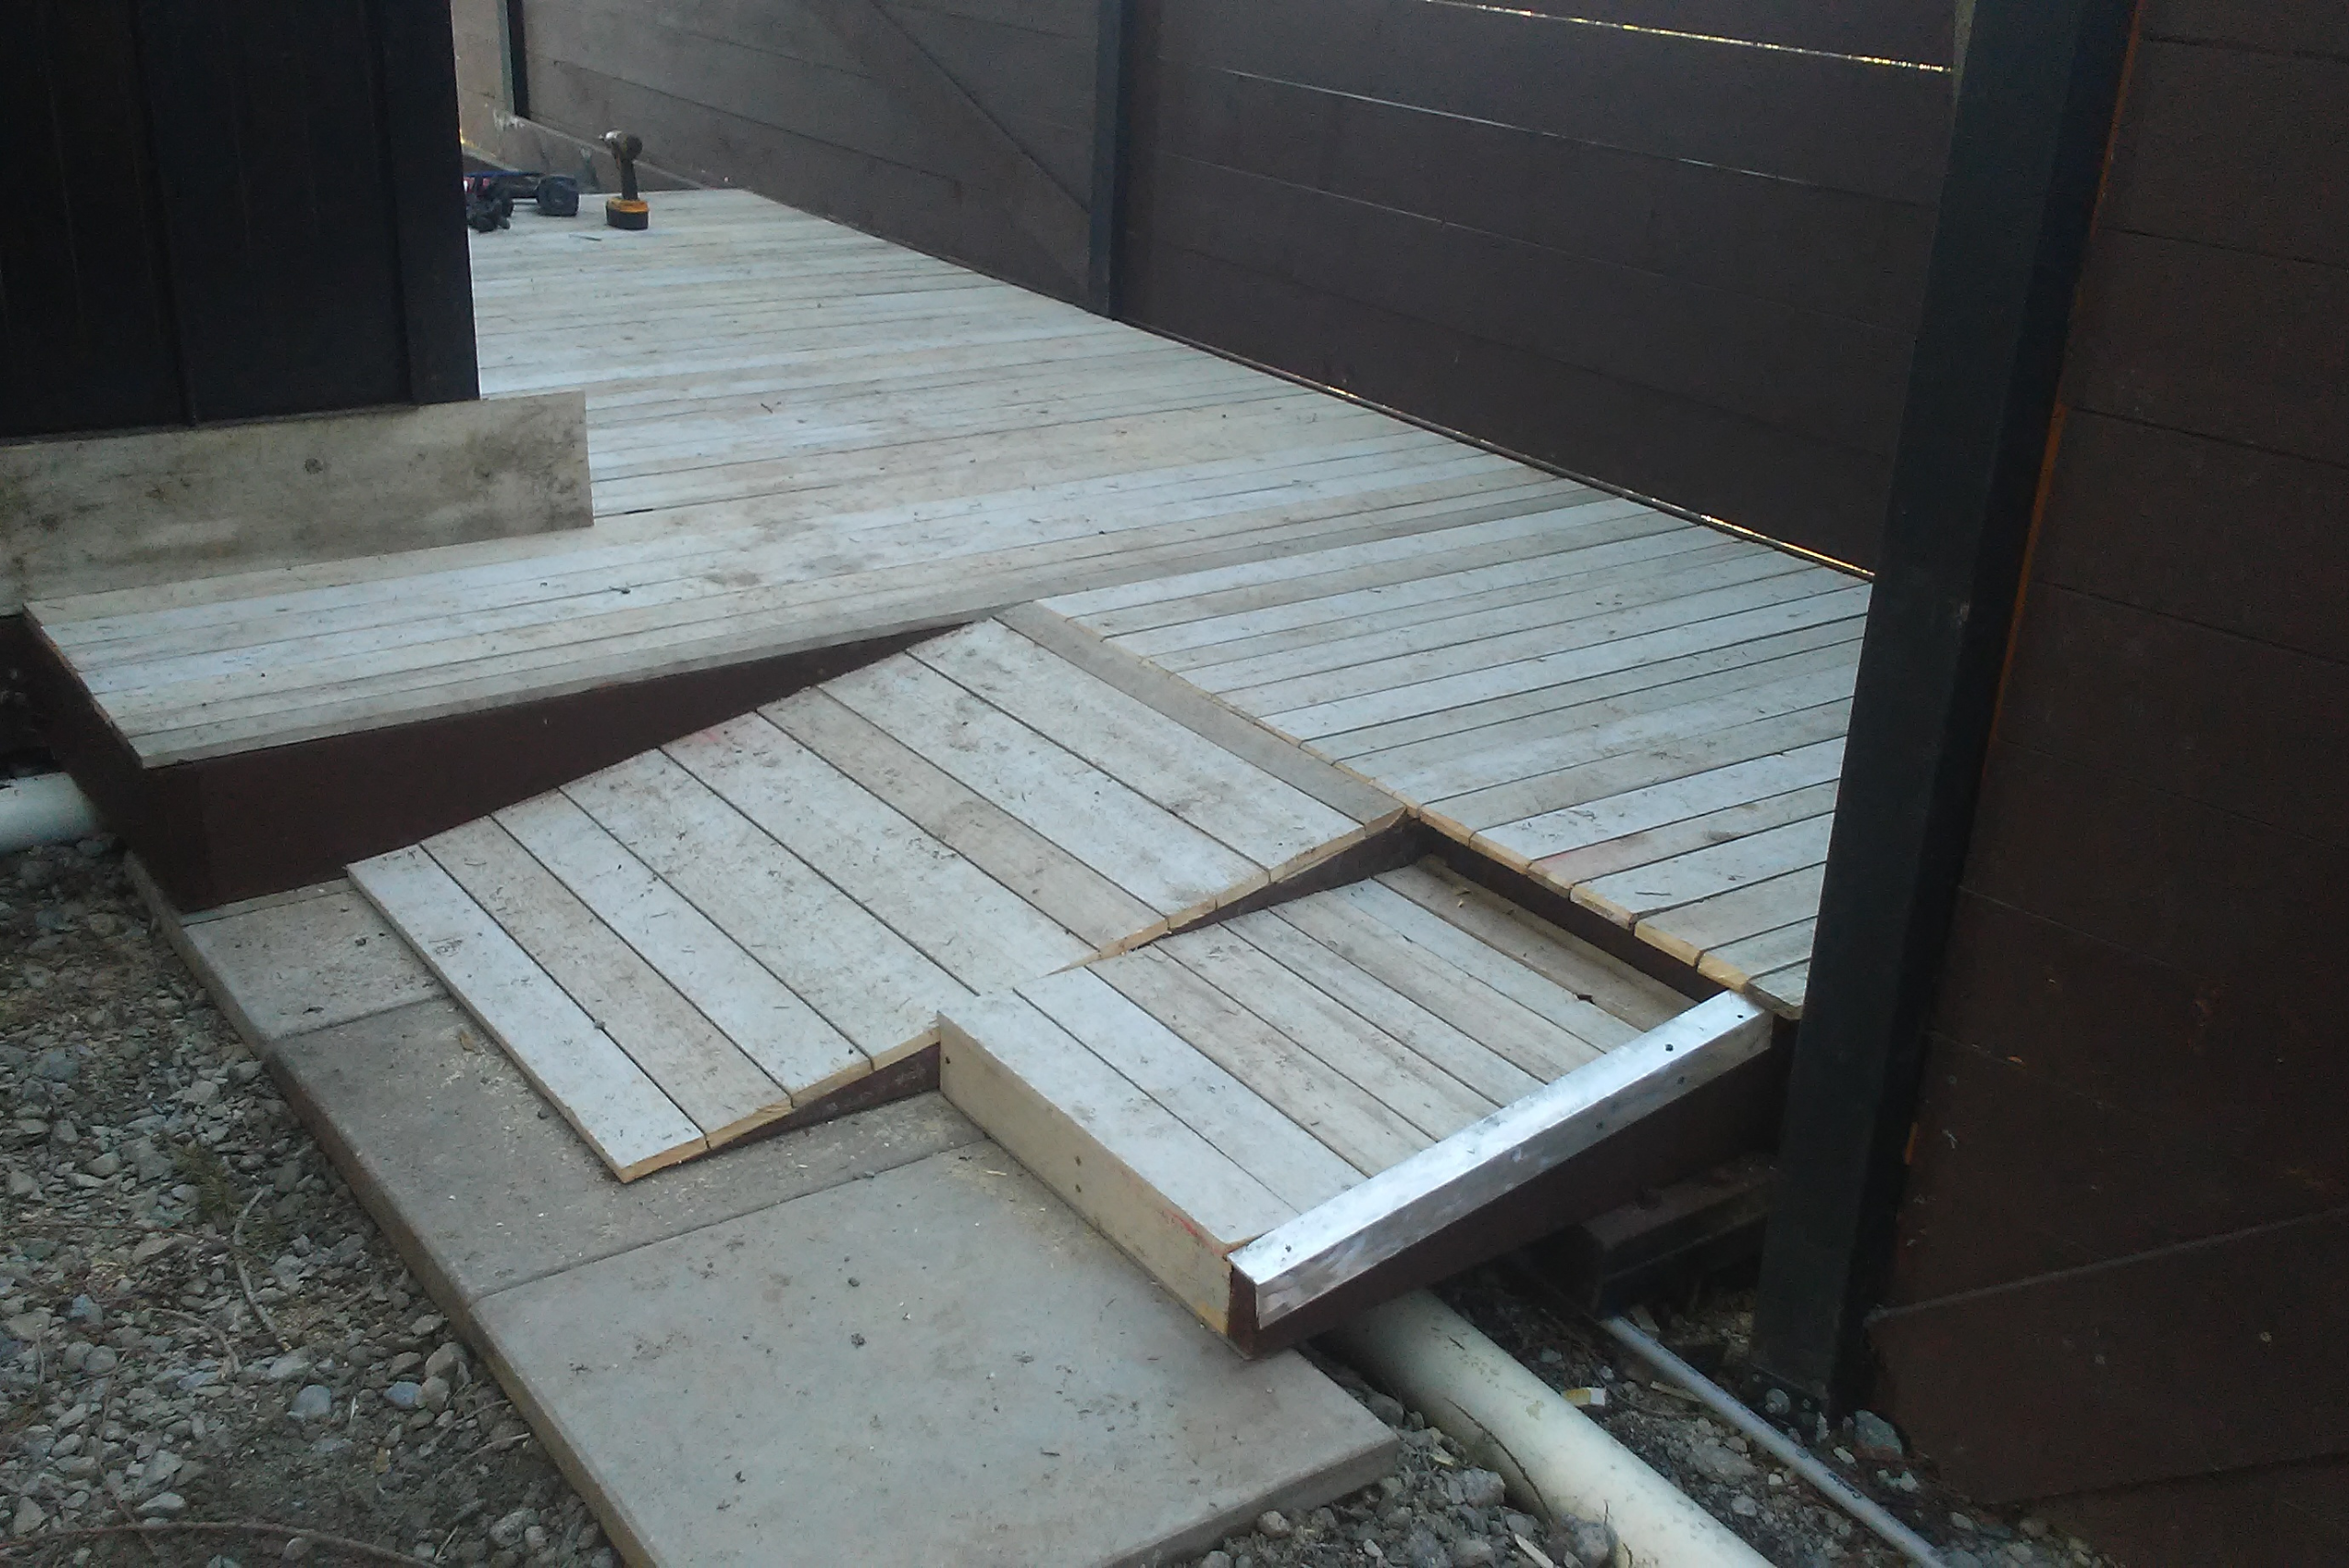 Easy to Follow Steps for How to Build a Wooden Ramp